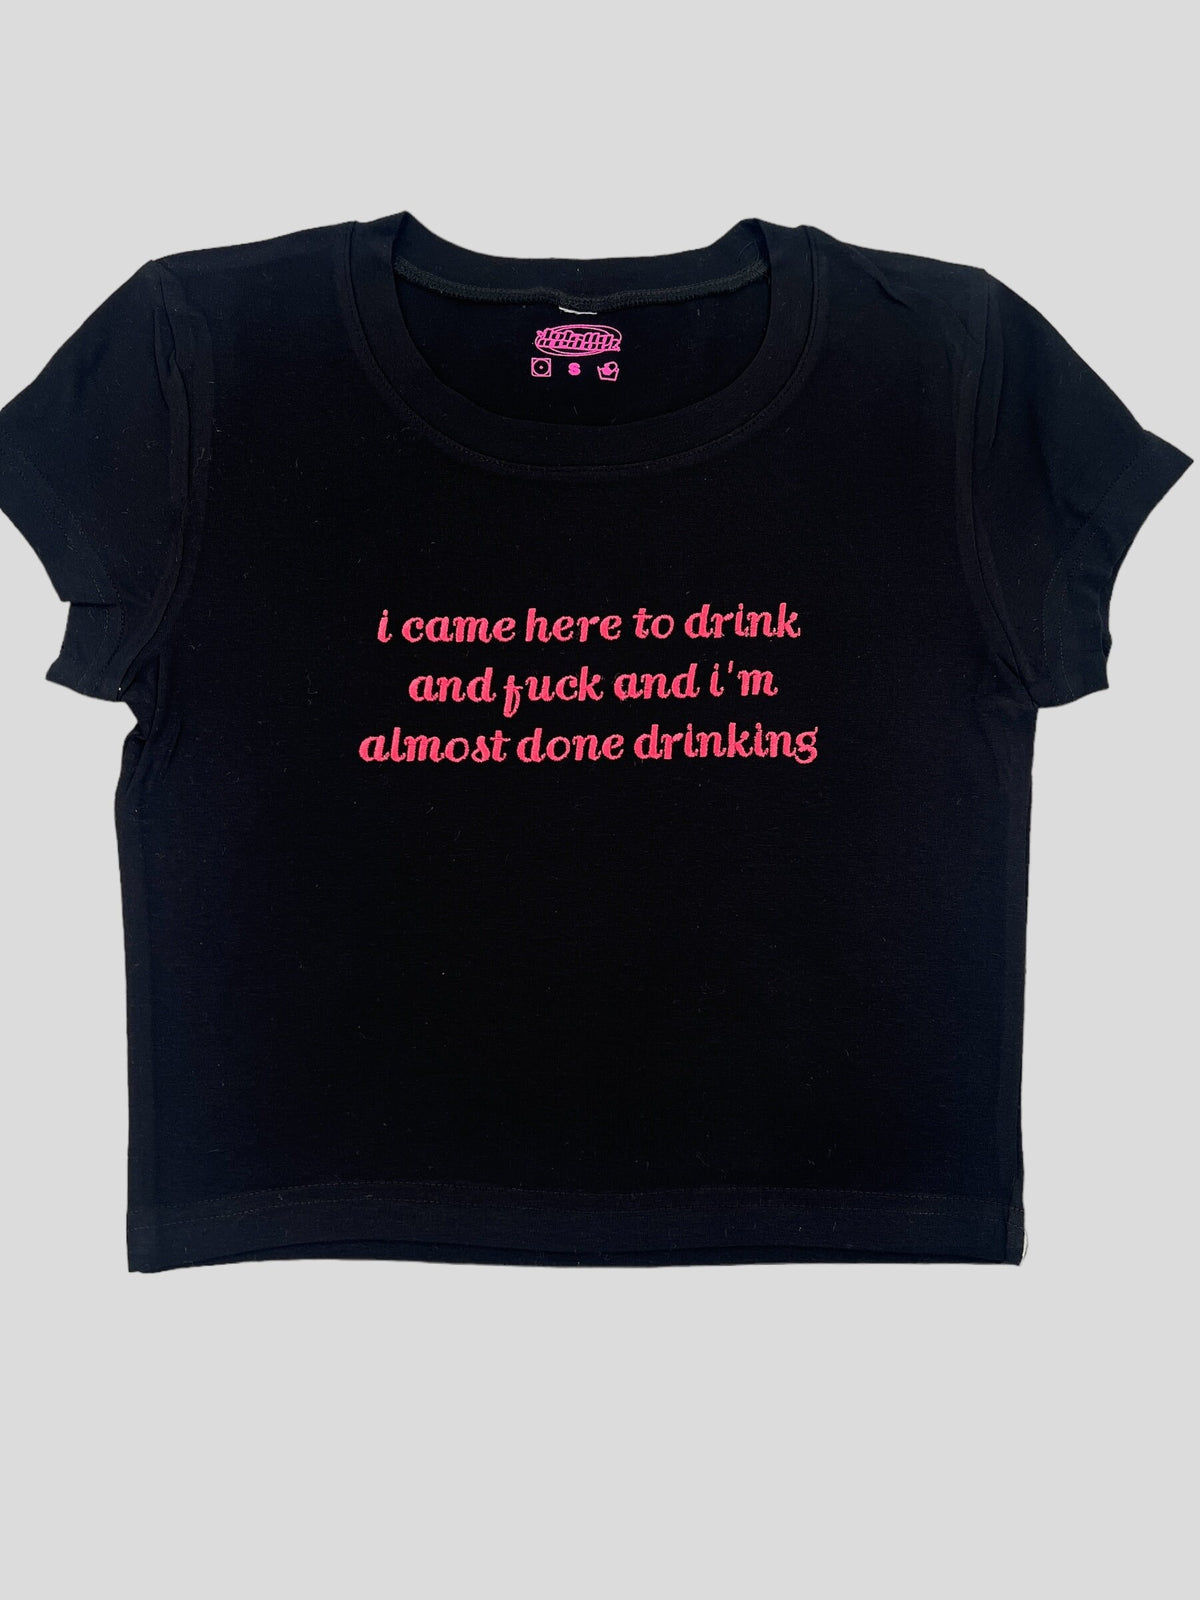 a black t - shirt with pink writing that says i came here to drink and